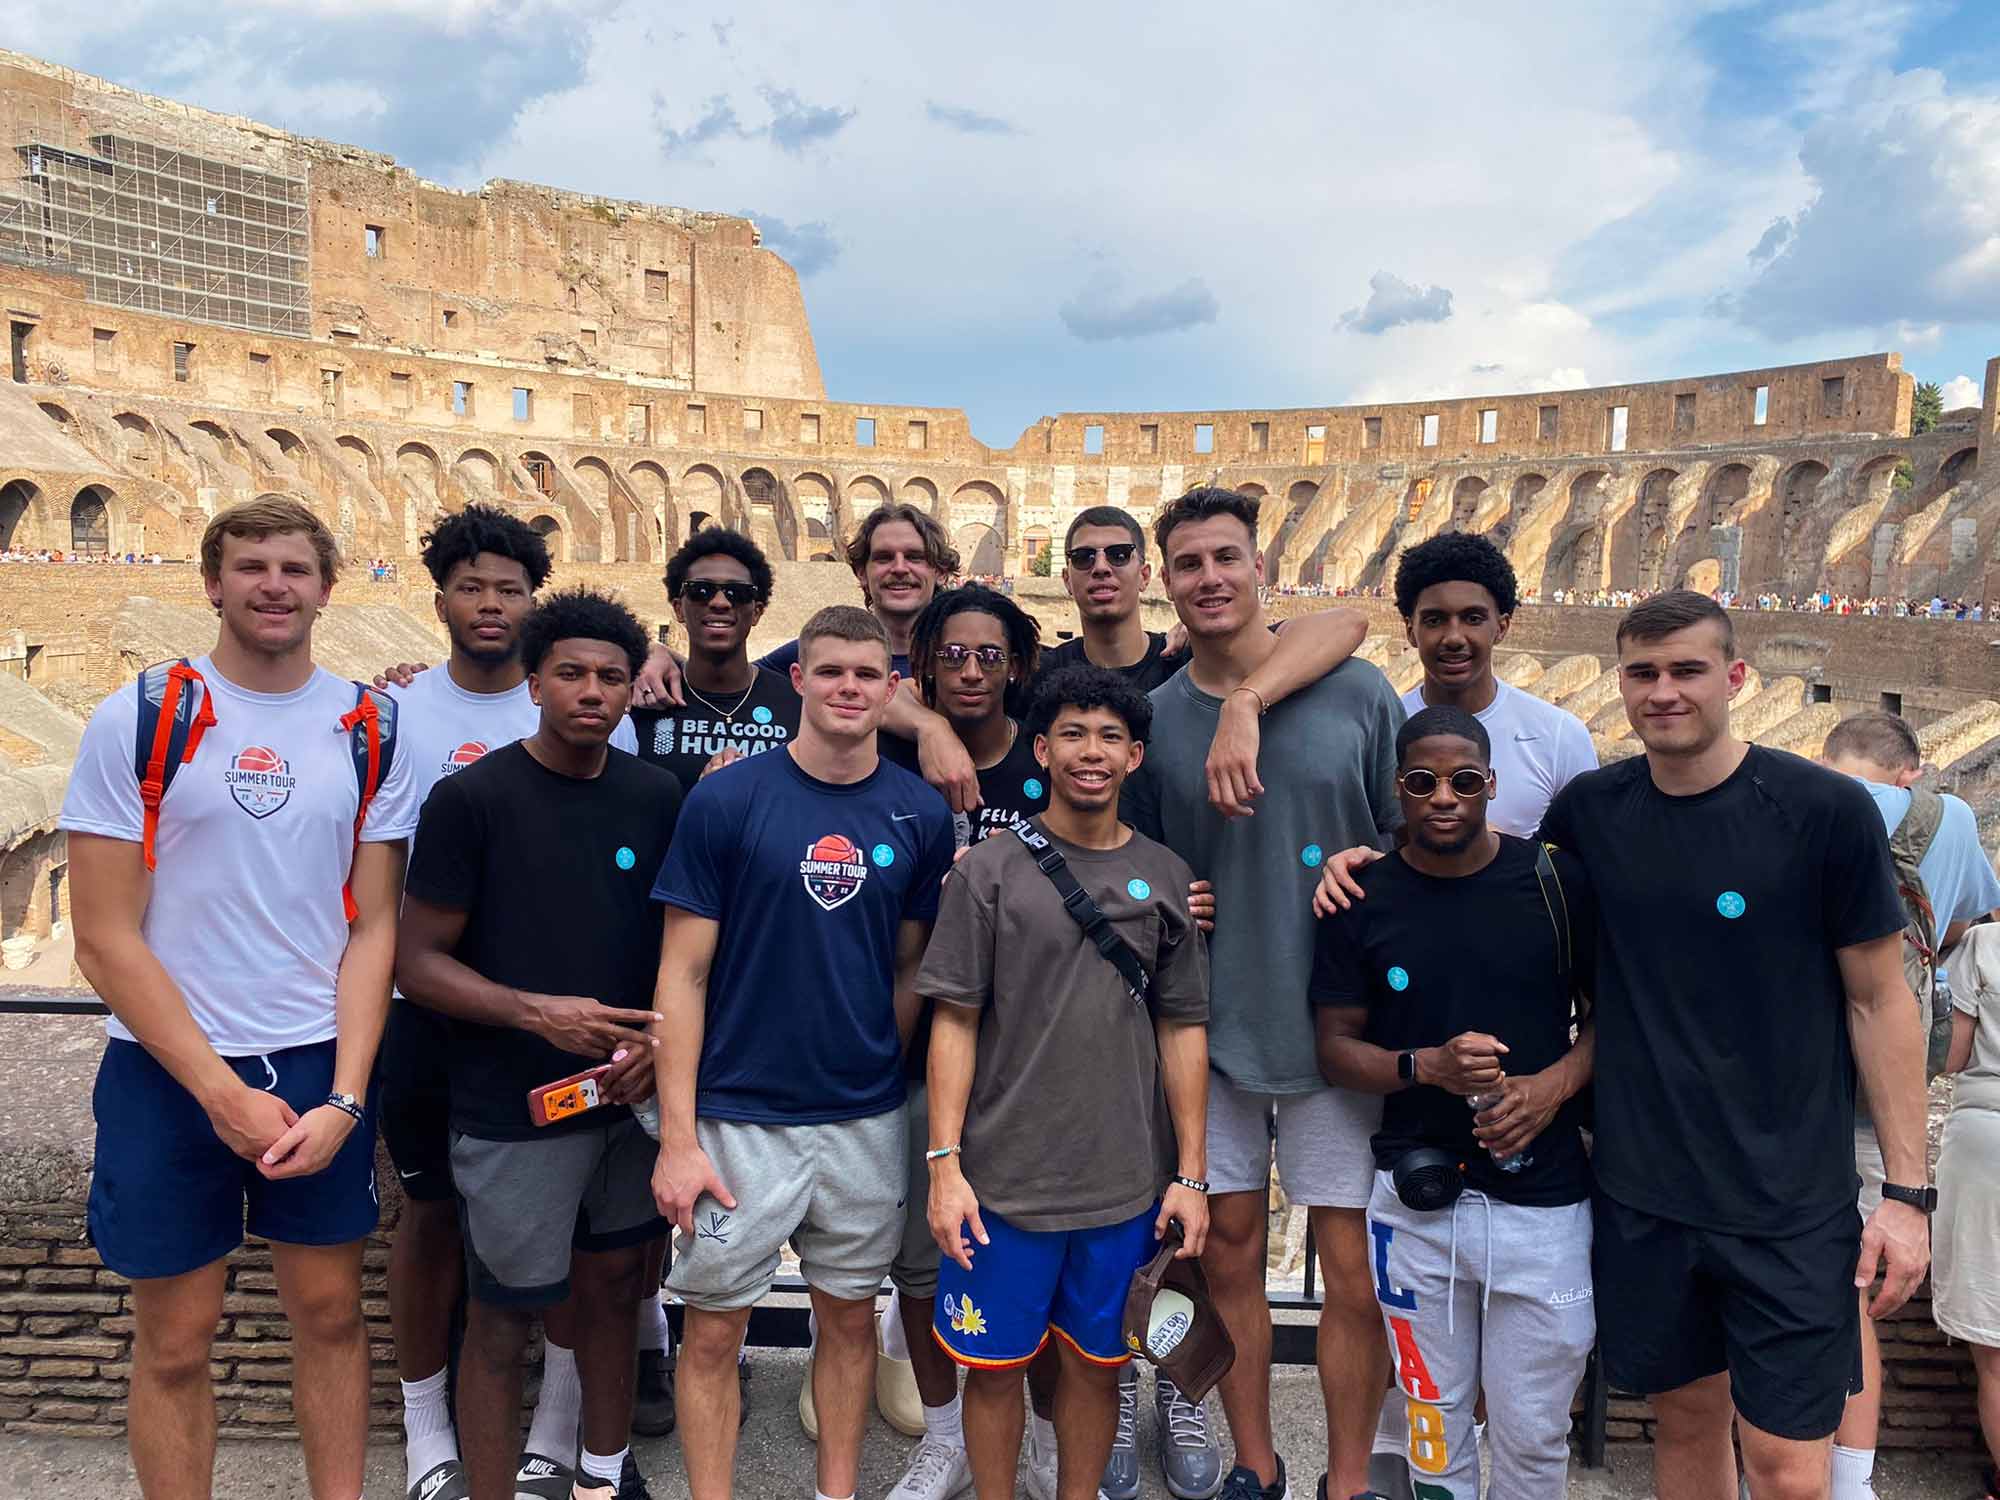 Thirteen teammates pose for a group shot in front of the Colosseum